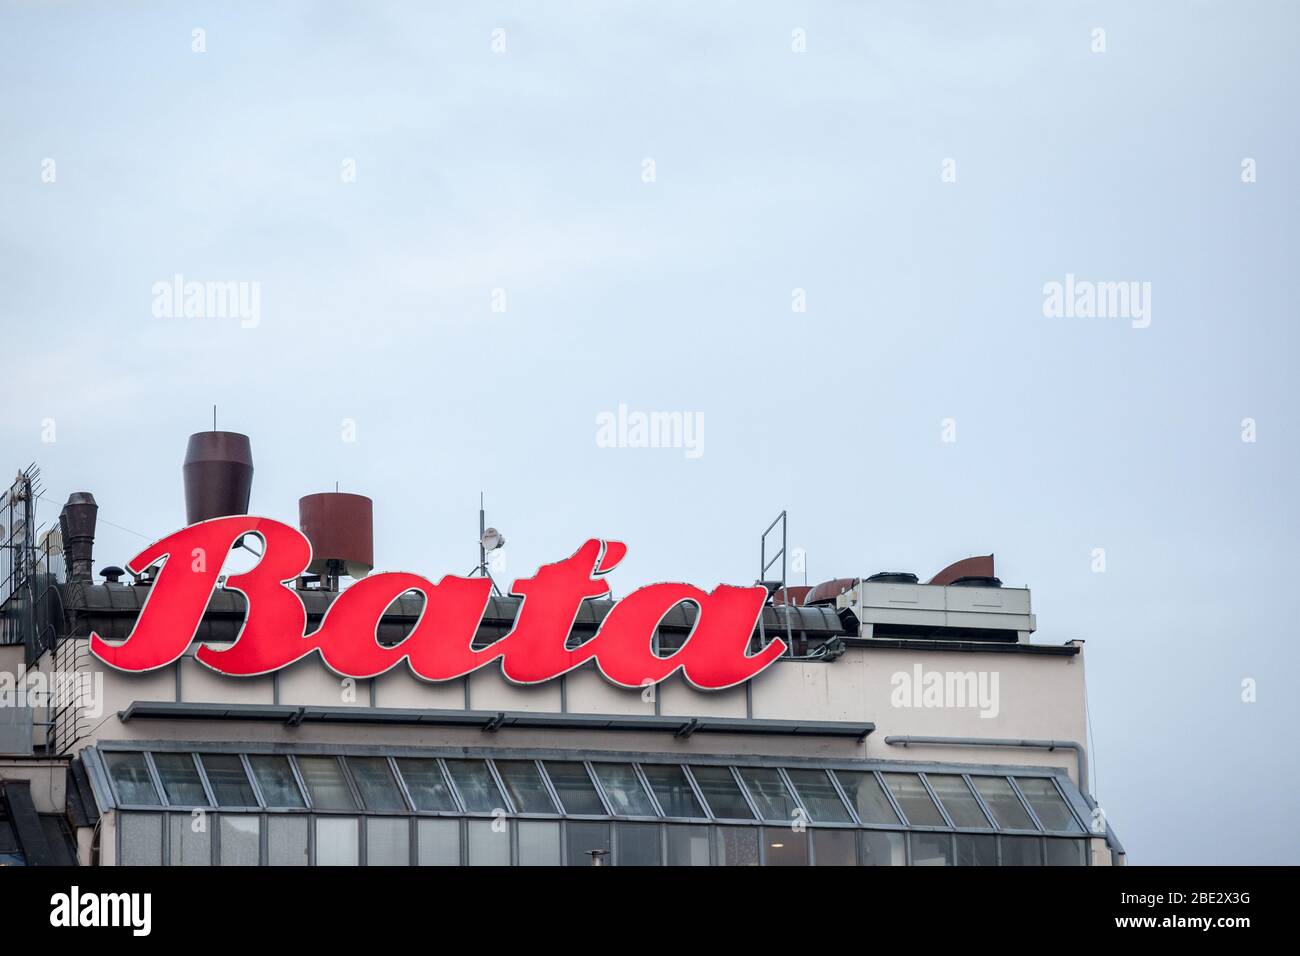 PRAGUE, CZECHIA - NOVEMBER 3, 2019: Bata Shoes sign in front of their local shop in Prague. Bata is a shoes and footwear manufacturer and retailer fro Stock Photo